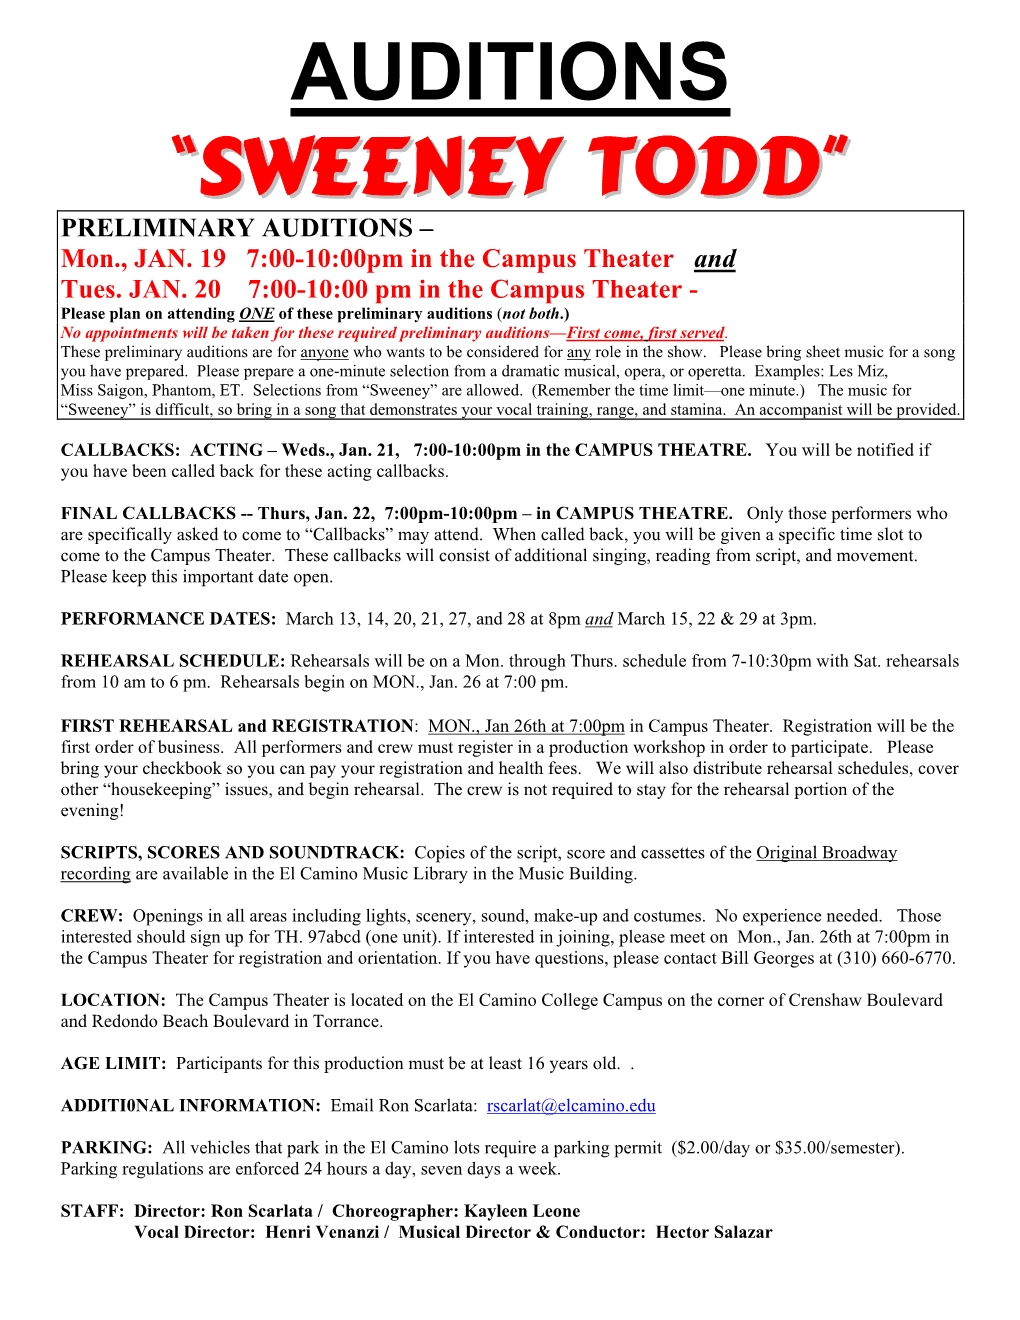 Auditions “Sweeney Todd”